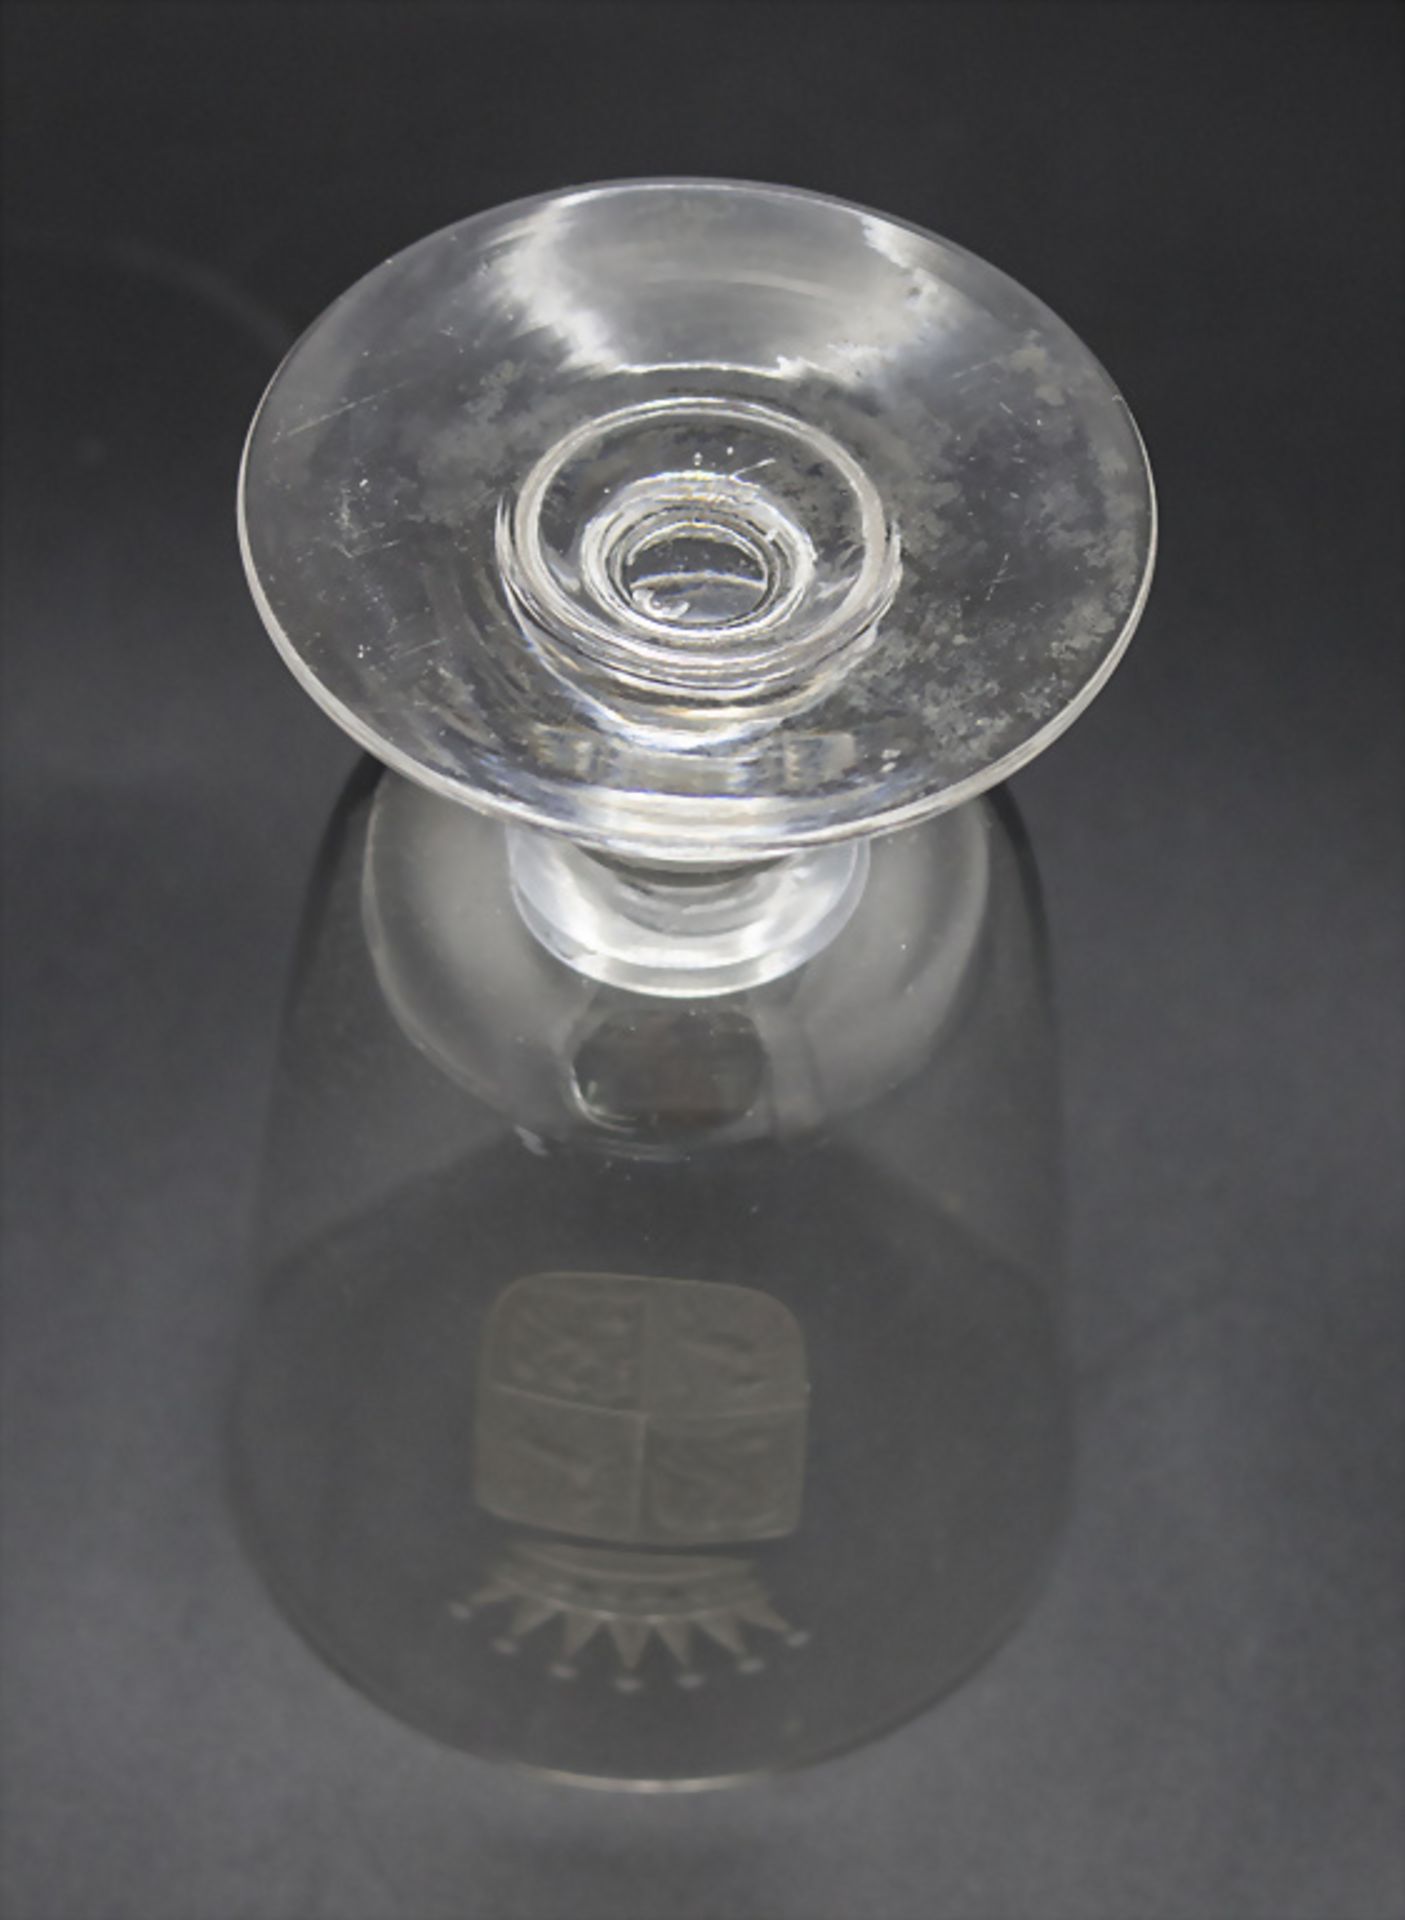 Fußbecher mit Wappen / A footed glass beaker with coat of arms, 19. Jh. - Image 2 of 2